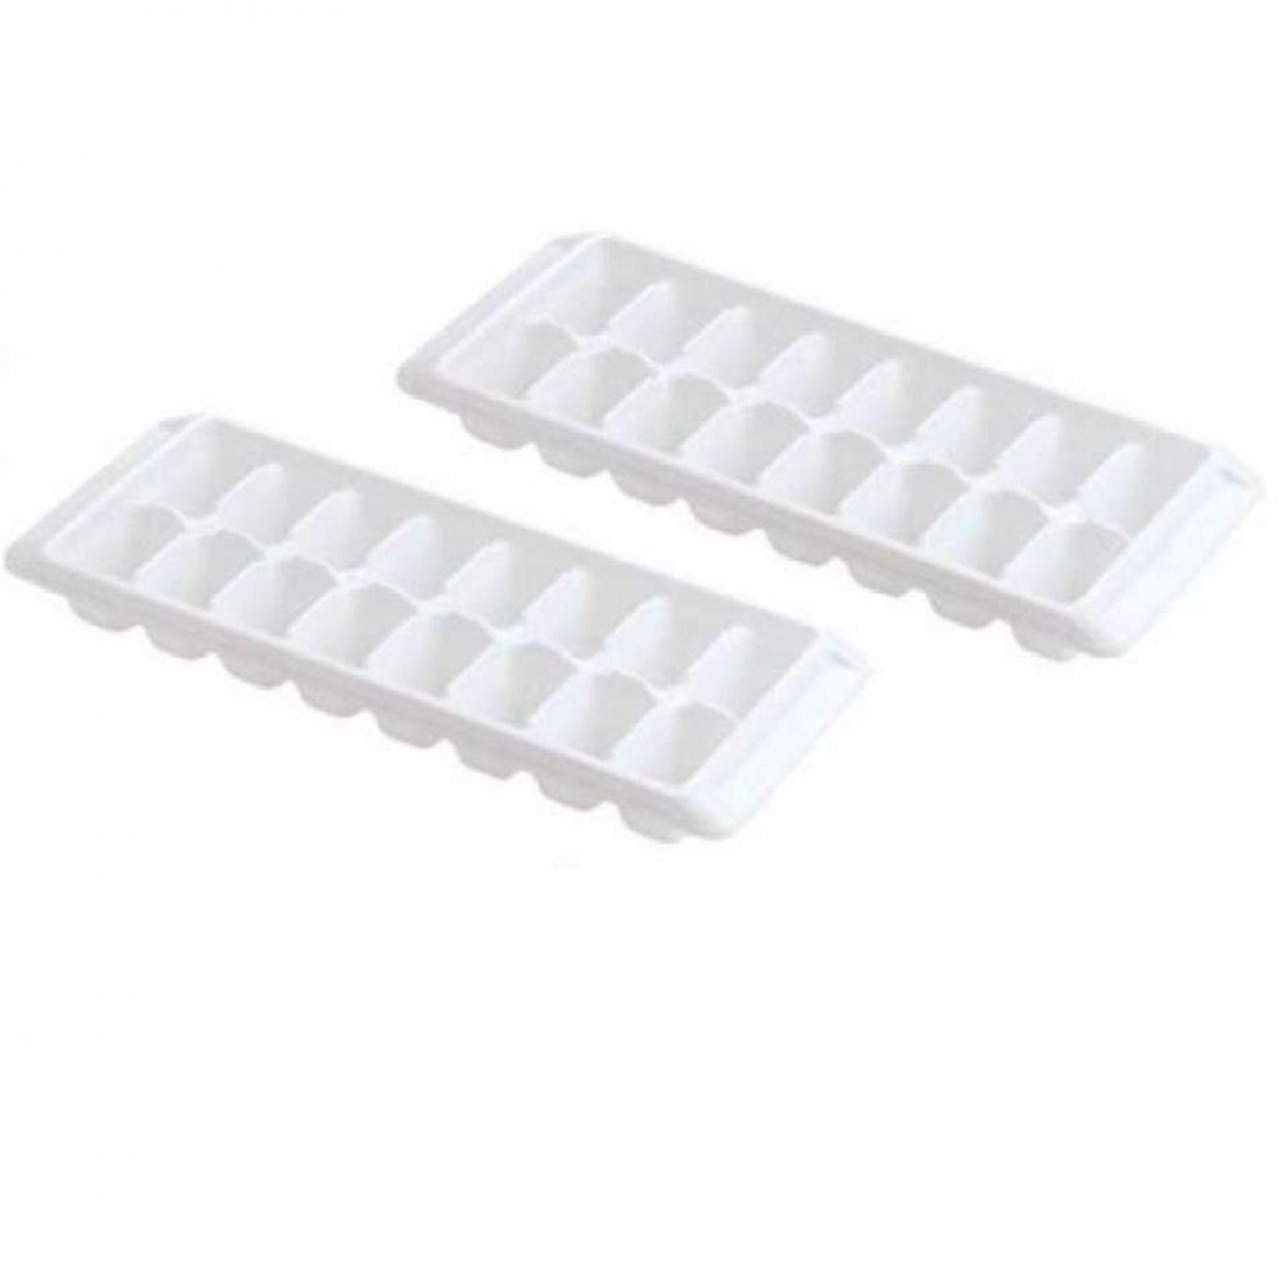 Pack of 2 - Ice Cube Trays - White